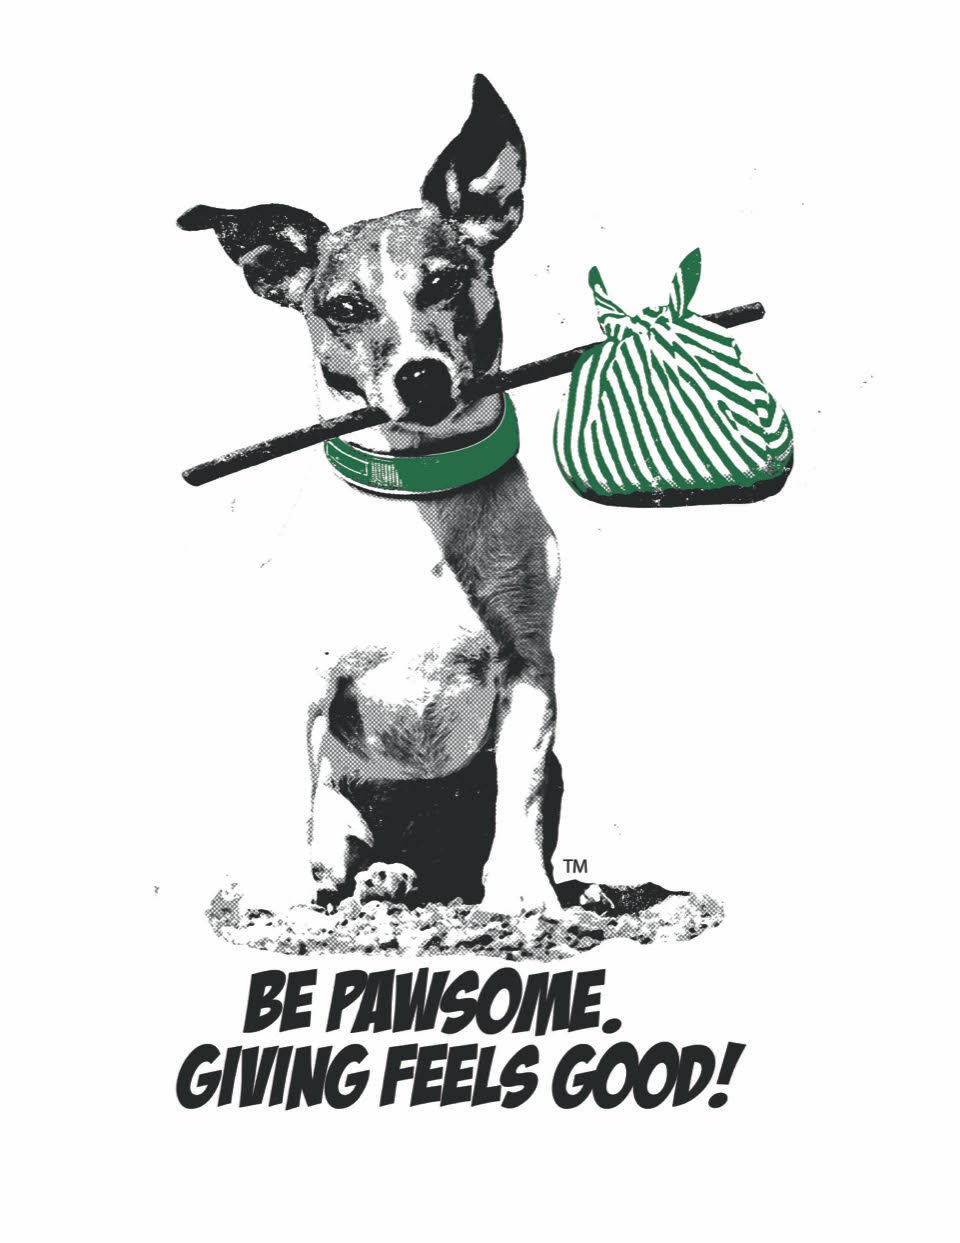 Be Pawsome. Giving Feels Good!
We make it easy for Volunteers to help homeless pets.
Our donation supply drive boxes make it easier for people to give.